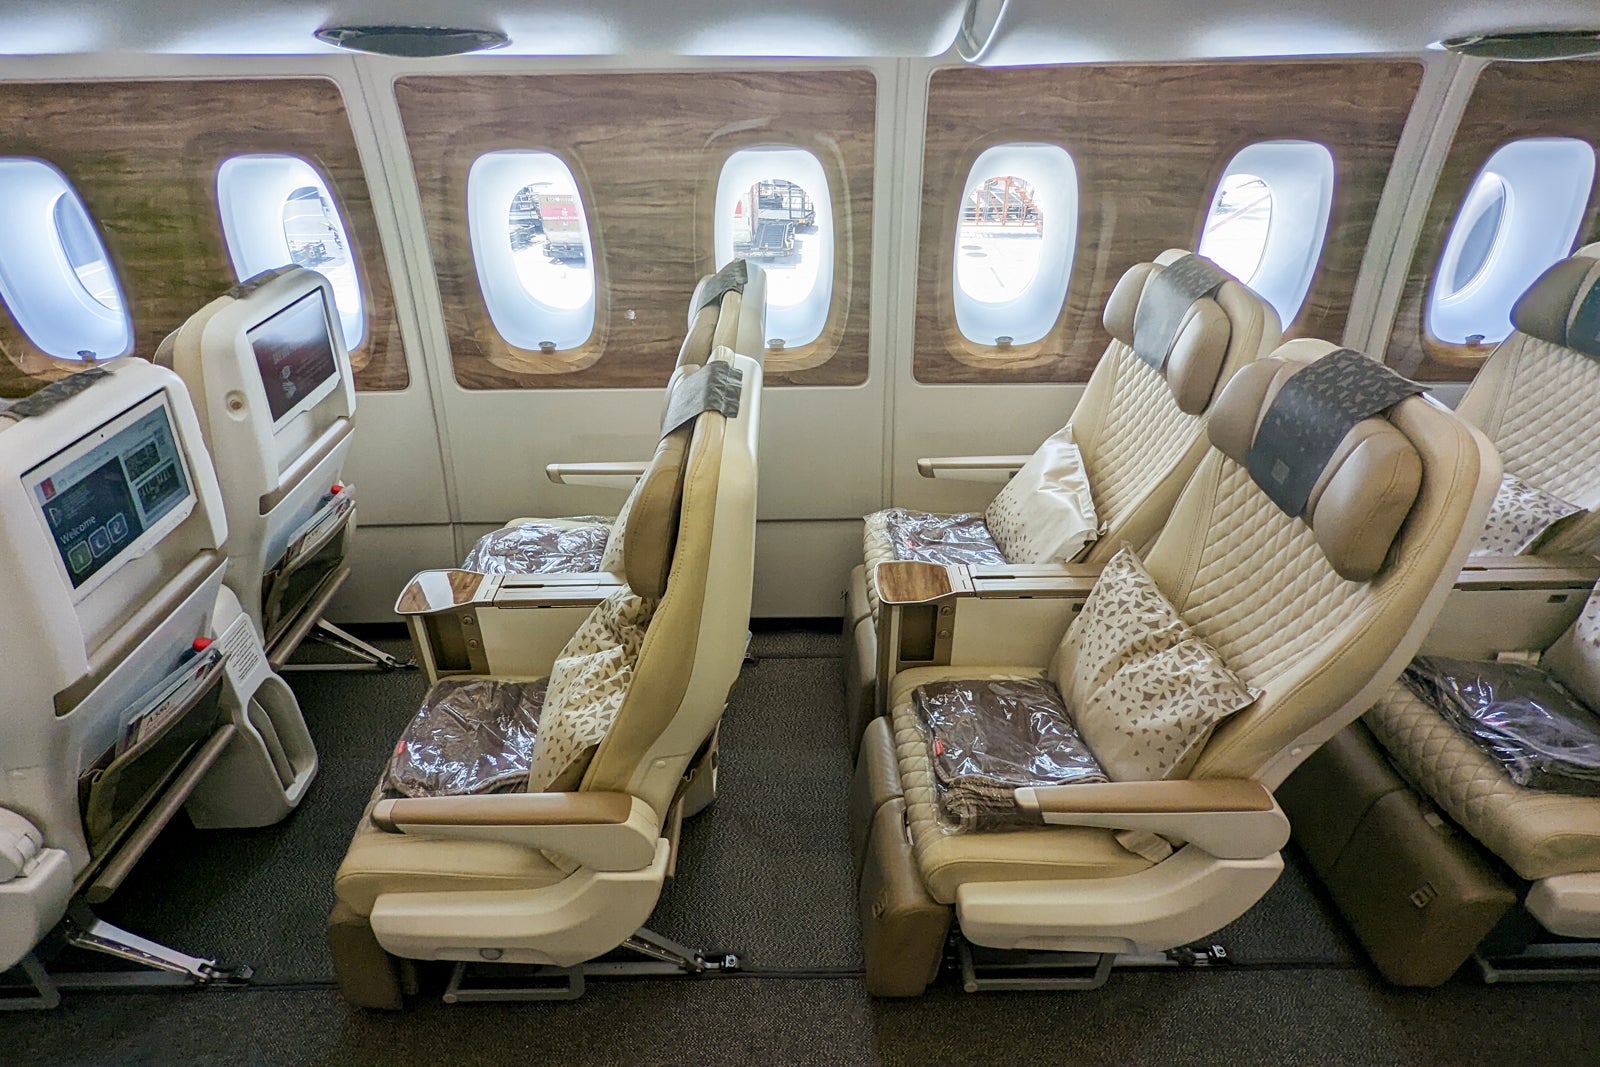 A review of Emirates' new premium economy on the A380 from Dubai